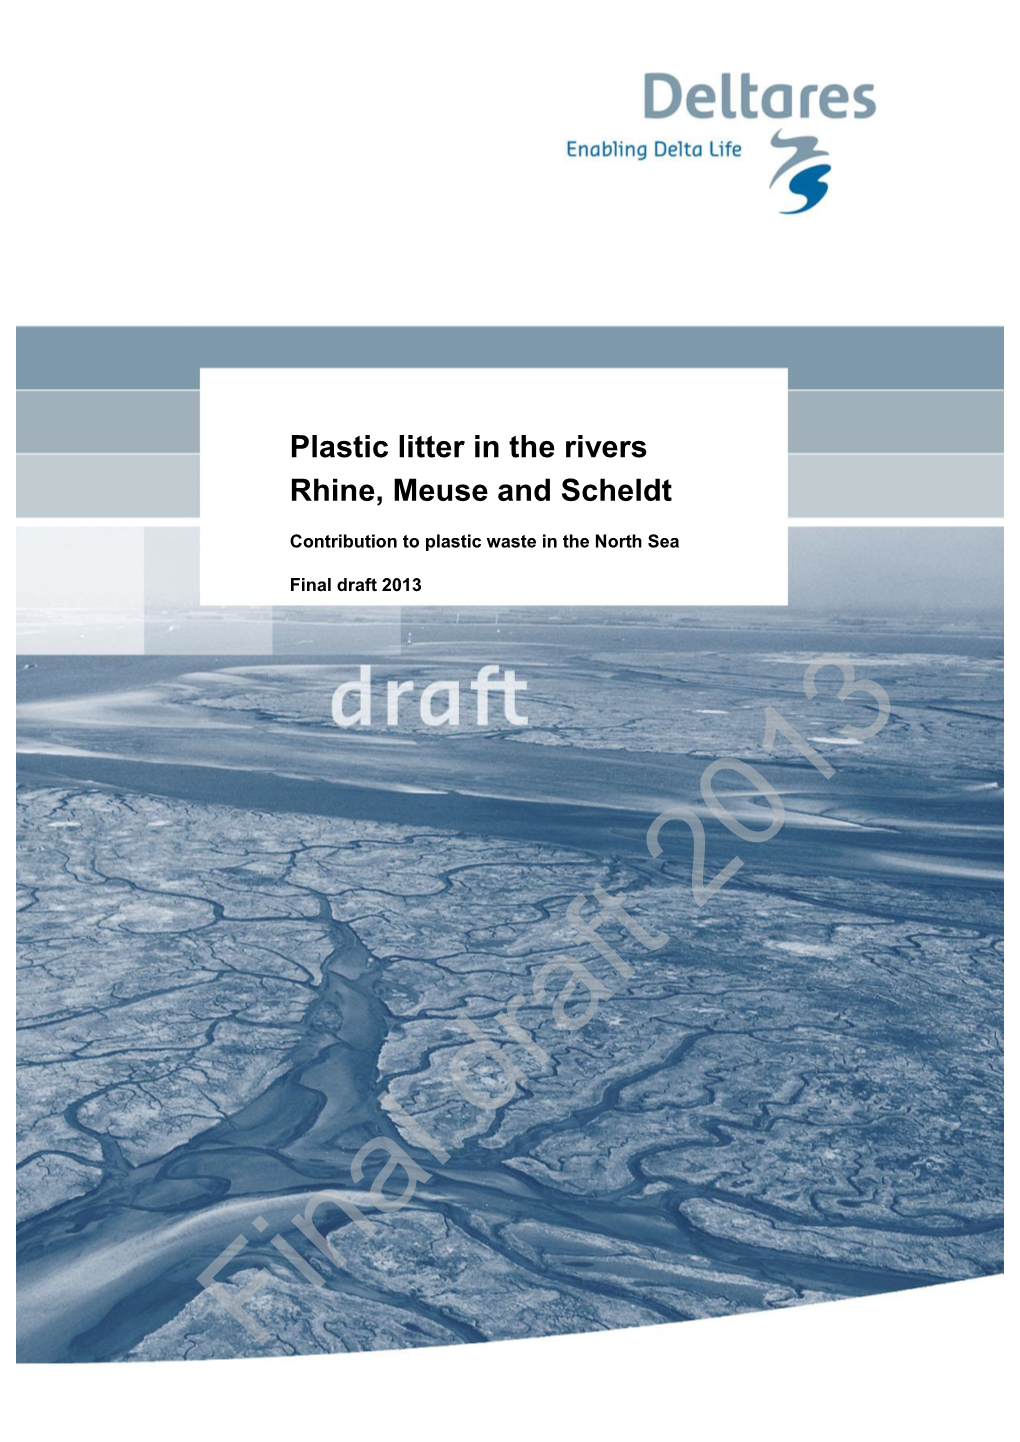 Plastic Litter in the Rivers Rhine, Meuse and Scheldt